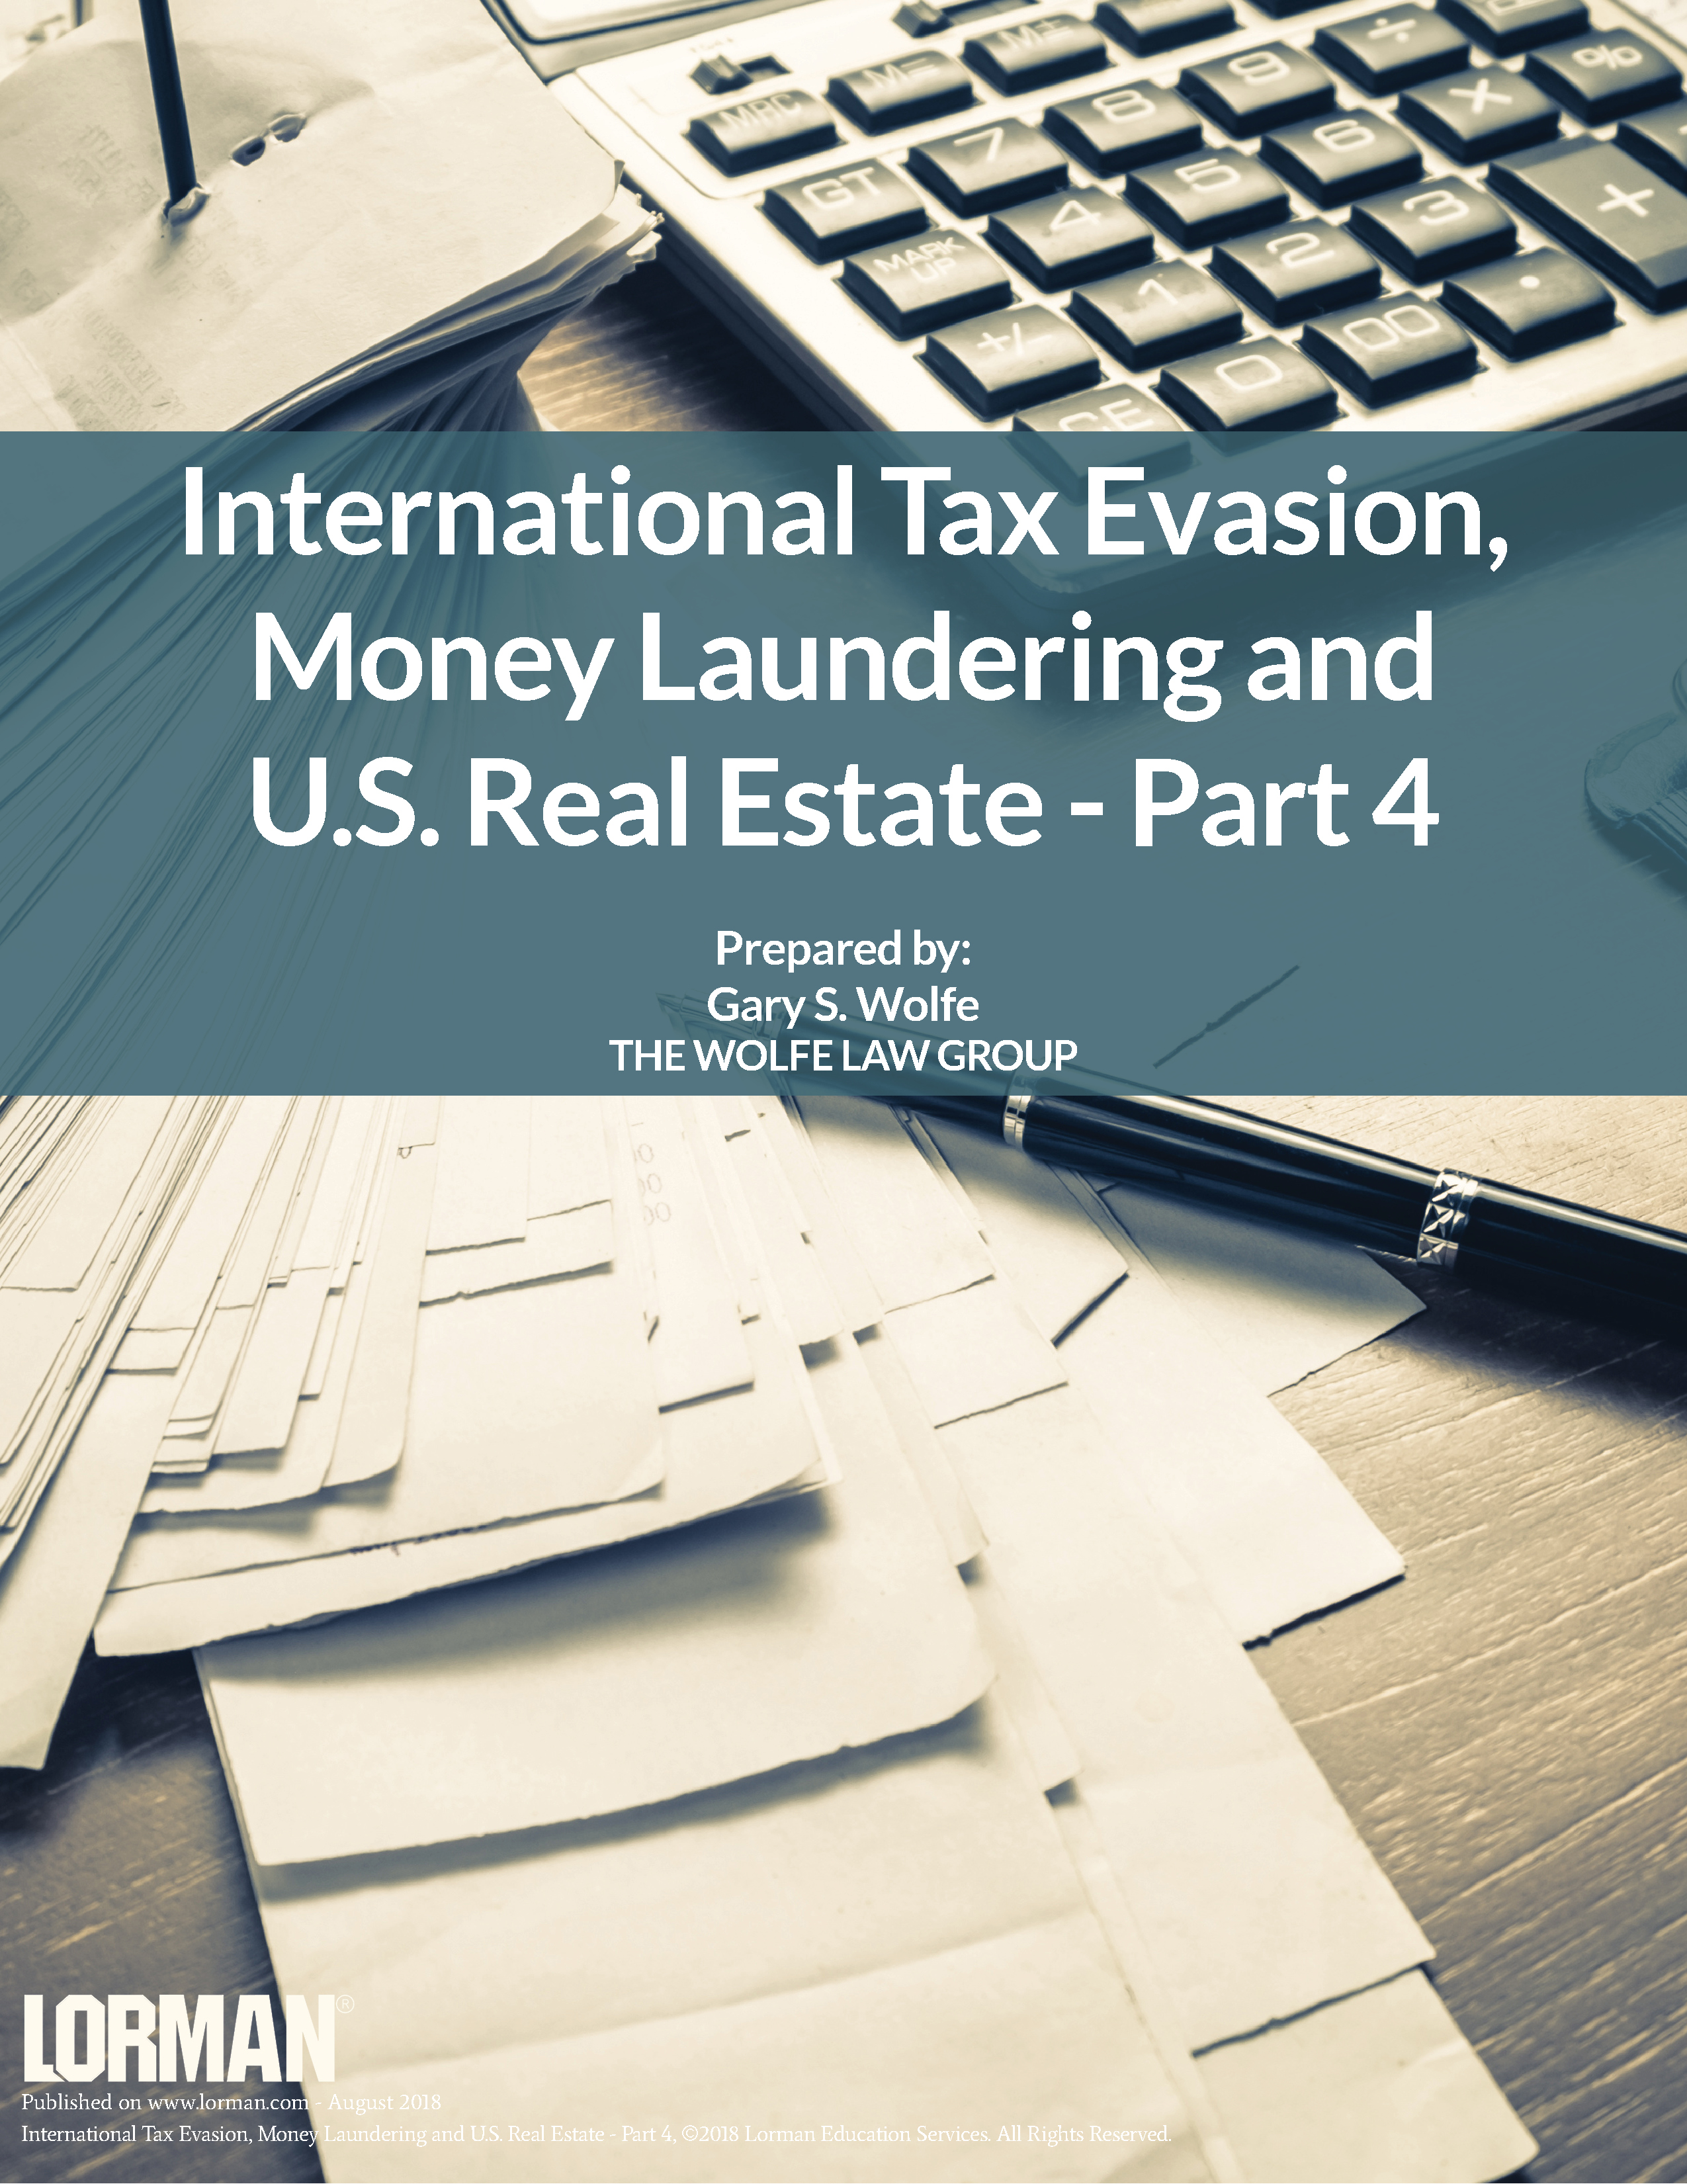 International Tax Evasion, Money Laundering and U.S. Real Estate - Part 4